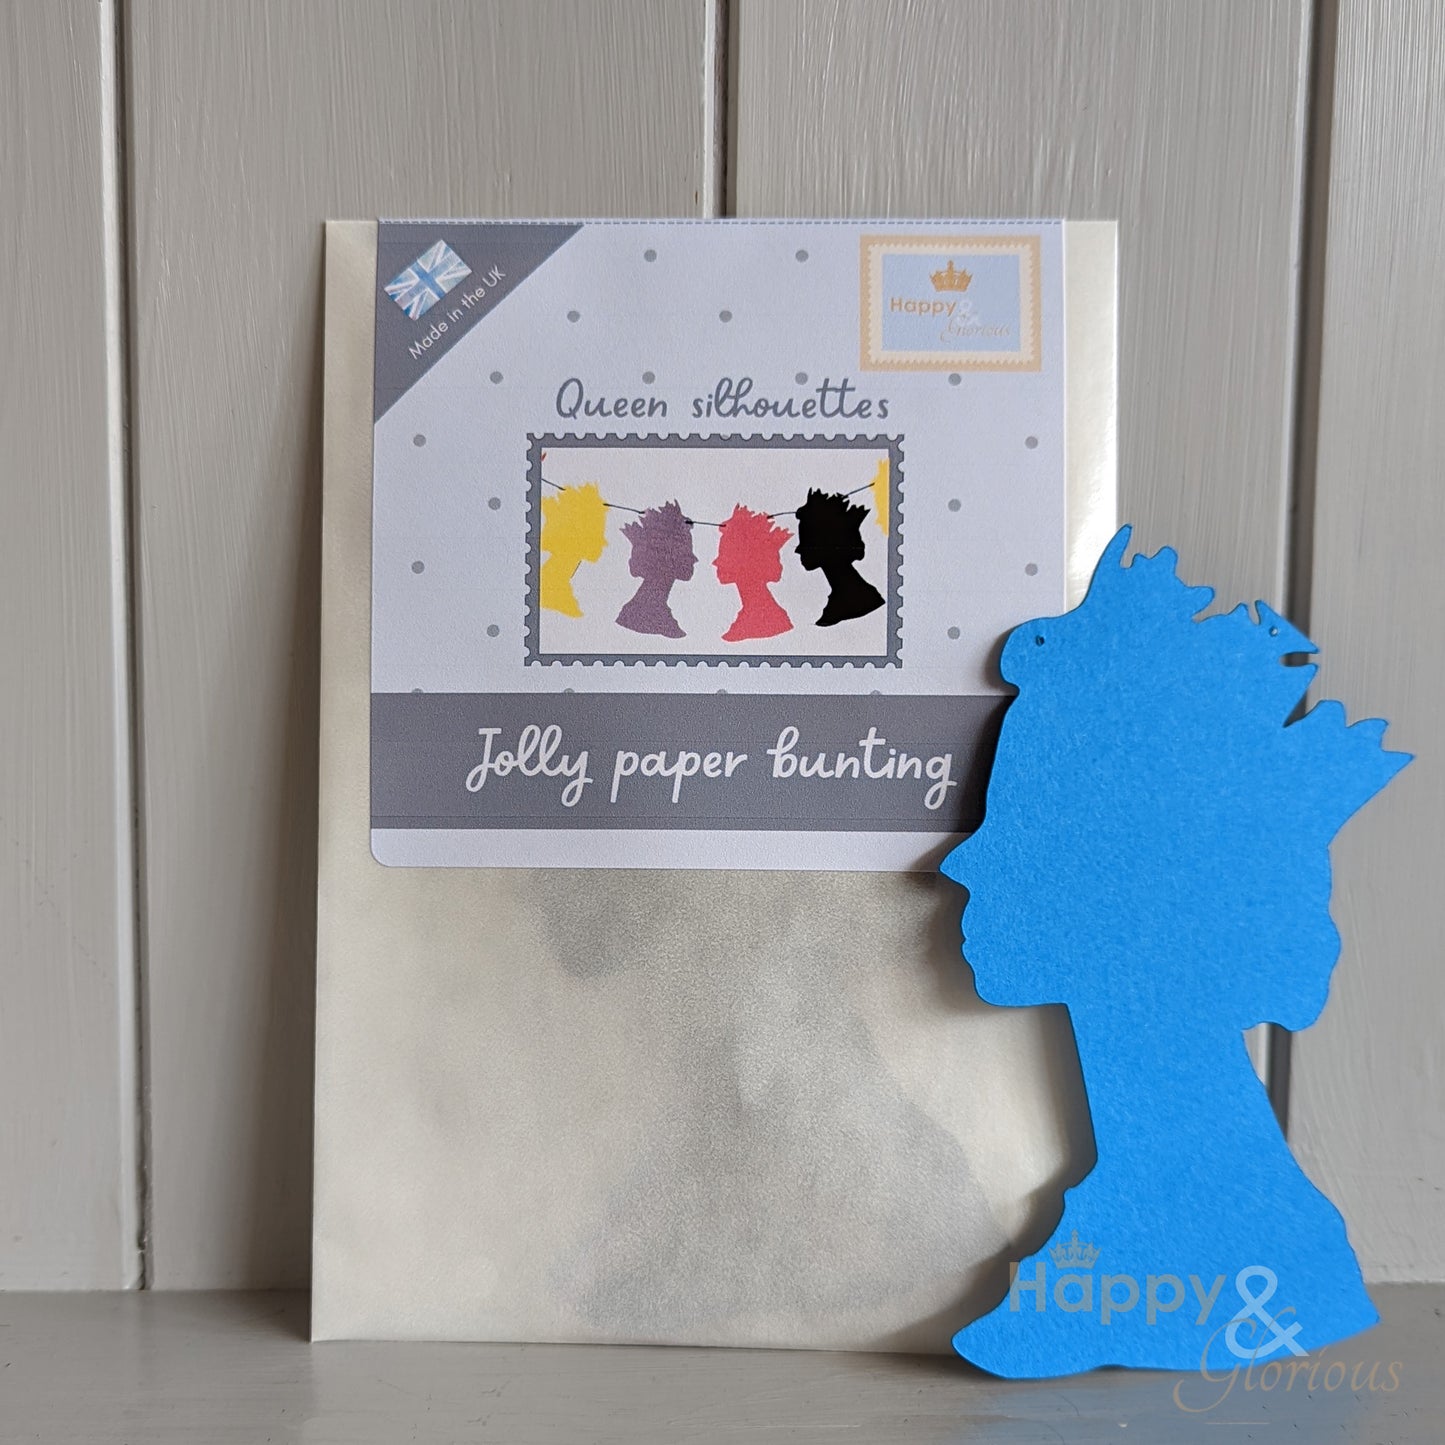 Jolly paper bunting - queen silhouettes